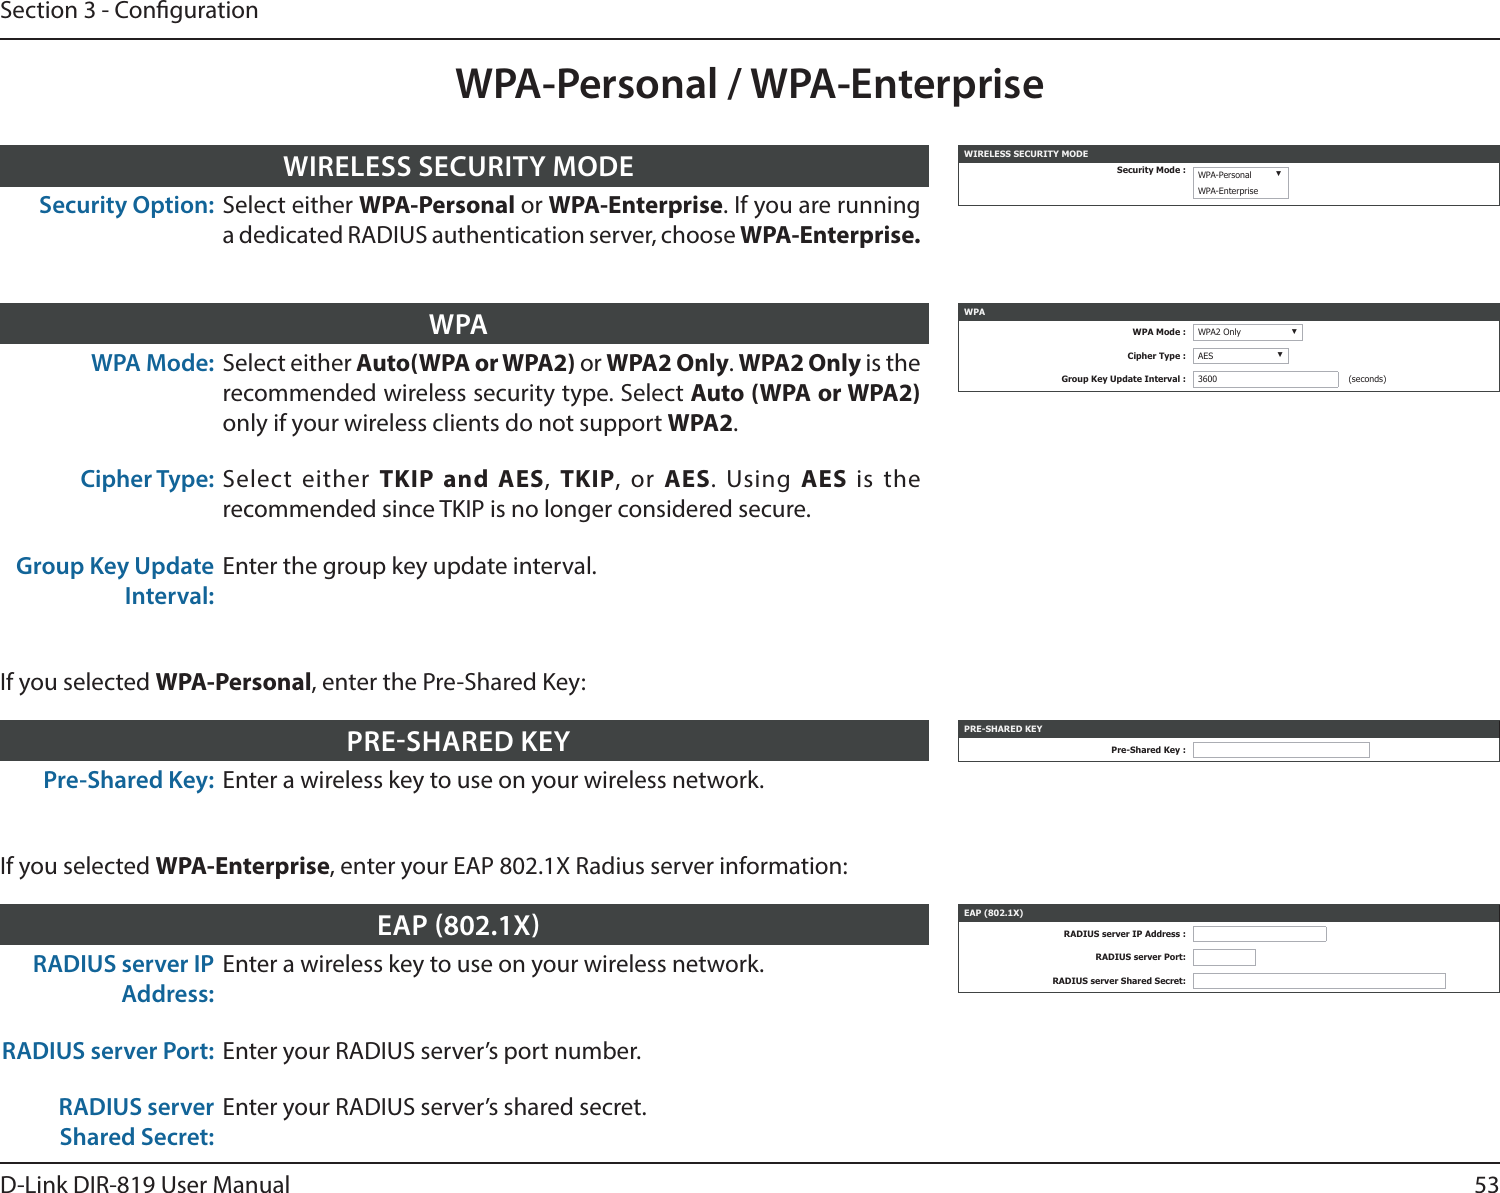 53D-Link DIR-819 User ManualSection 3 - CongurationWPA-Personal / WPA-EnterpriseWPA Mode: Select either Auto(WPA or WPA2) or WPA2 Only. WPA2 Only is the recommended wireless security type. Select Auto (WPA or WPA2) only if your wireless clients do not support WPA2.Cipher Type: Select either TKIP and AES,  TKIP, or AES. Using AES  is the recommended since TKIP is no longer considered secure. Group Key Update Interval:Enter the group key update interval.WPA WPAWPA Mode : WPA2 Only ▼Cipher Type : AES ▼Group Key Update Interval : 3600 (seconds)Pre-Shared Key: Enter a wireless key to use on your wireless network.PRESHARED KEY PRE-SHARED KEYPre-Shared Key :If you selected WPA-Personal, enter the Pre-Shared Key:RADIUS server IP Address:Enter a wireless key to use on your wireless network.RADIUS server Port: Enter your RADIUS server’s port number.RADIUS server Shared Secret:Enter your RADIUS server’s shared secret.EAP 802.1X EAP (802.1X)RADIUS server IP Address :RADIUS server Port:RADIUS server Shared Secret:If you selected WPA-Enterprise, enter your EAP 802.1X Radius server information:Security Option: Select either WPA-Personal or WPA-Enterprise. If you are running a dedicated RADIUS authentication server, choose WPA-Enterprise.WIRELESS SECURITY MODE WIRELESS SECURITY MODESecurity Mode : WPA-Personal ▼WPA-Enterprise